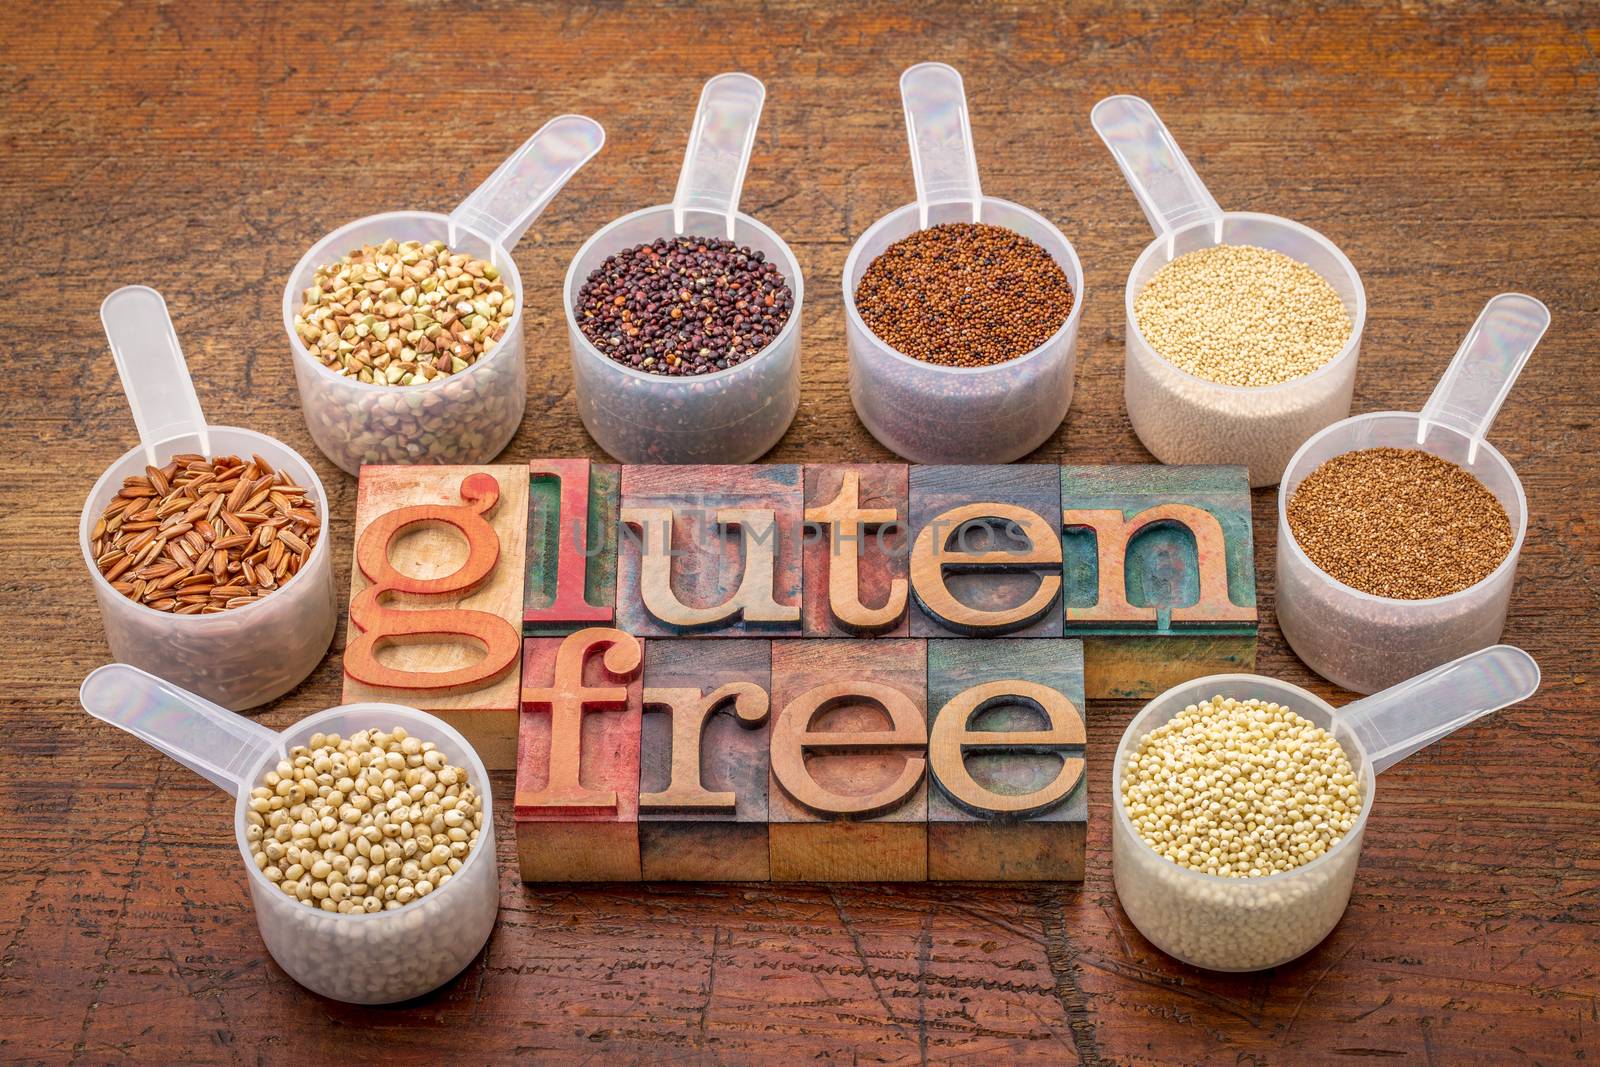 gluten free grains (quinoa, brown rice, kaniwa, amaranth, sorghum, millet, buckwheat, teff) - measuring scoops with a text in letterpress wood type